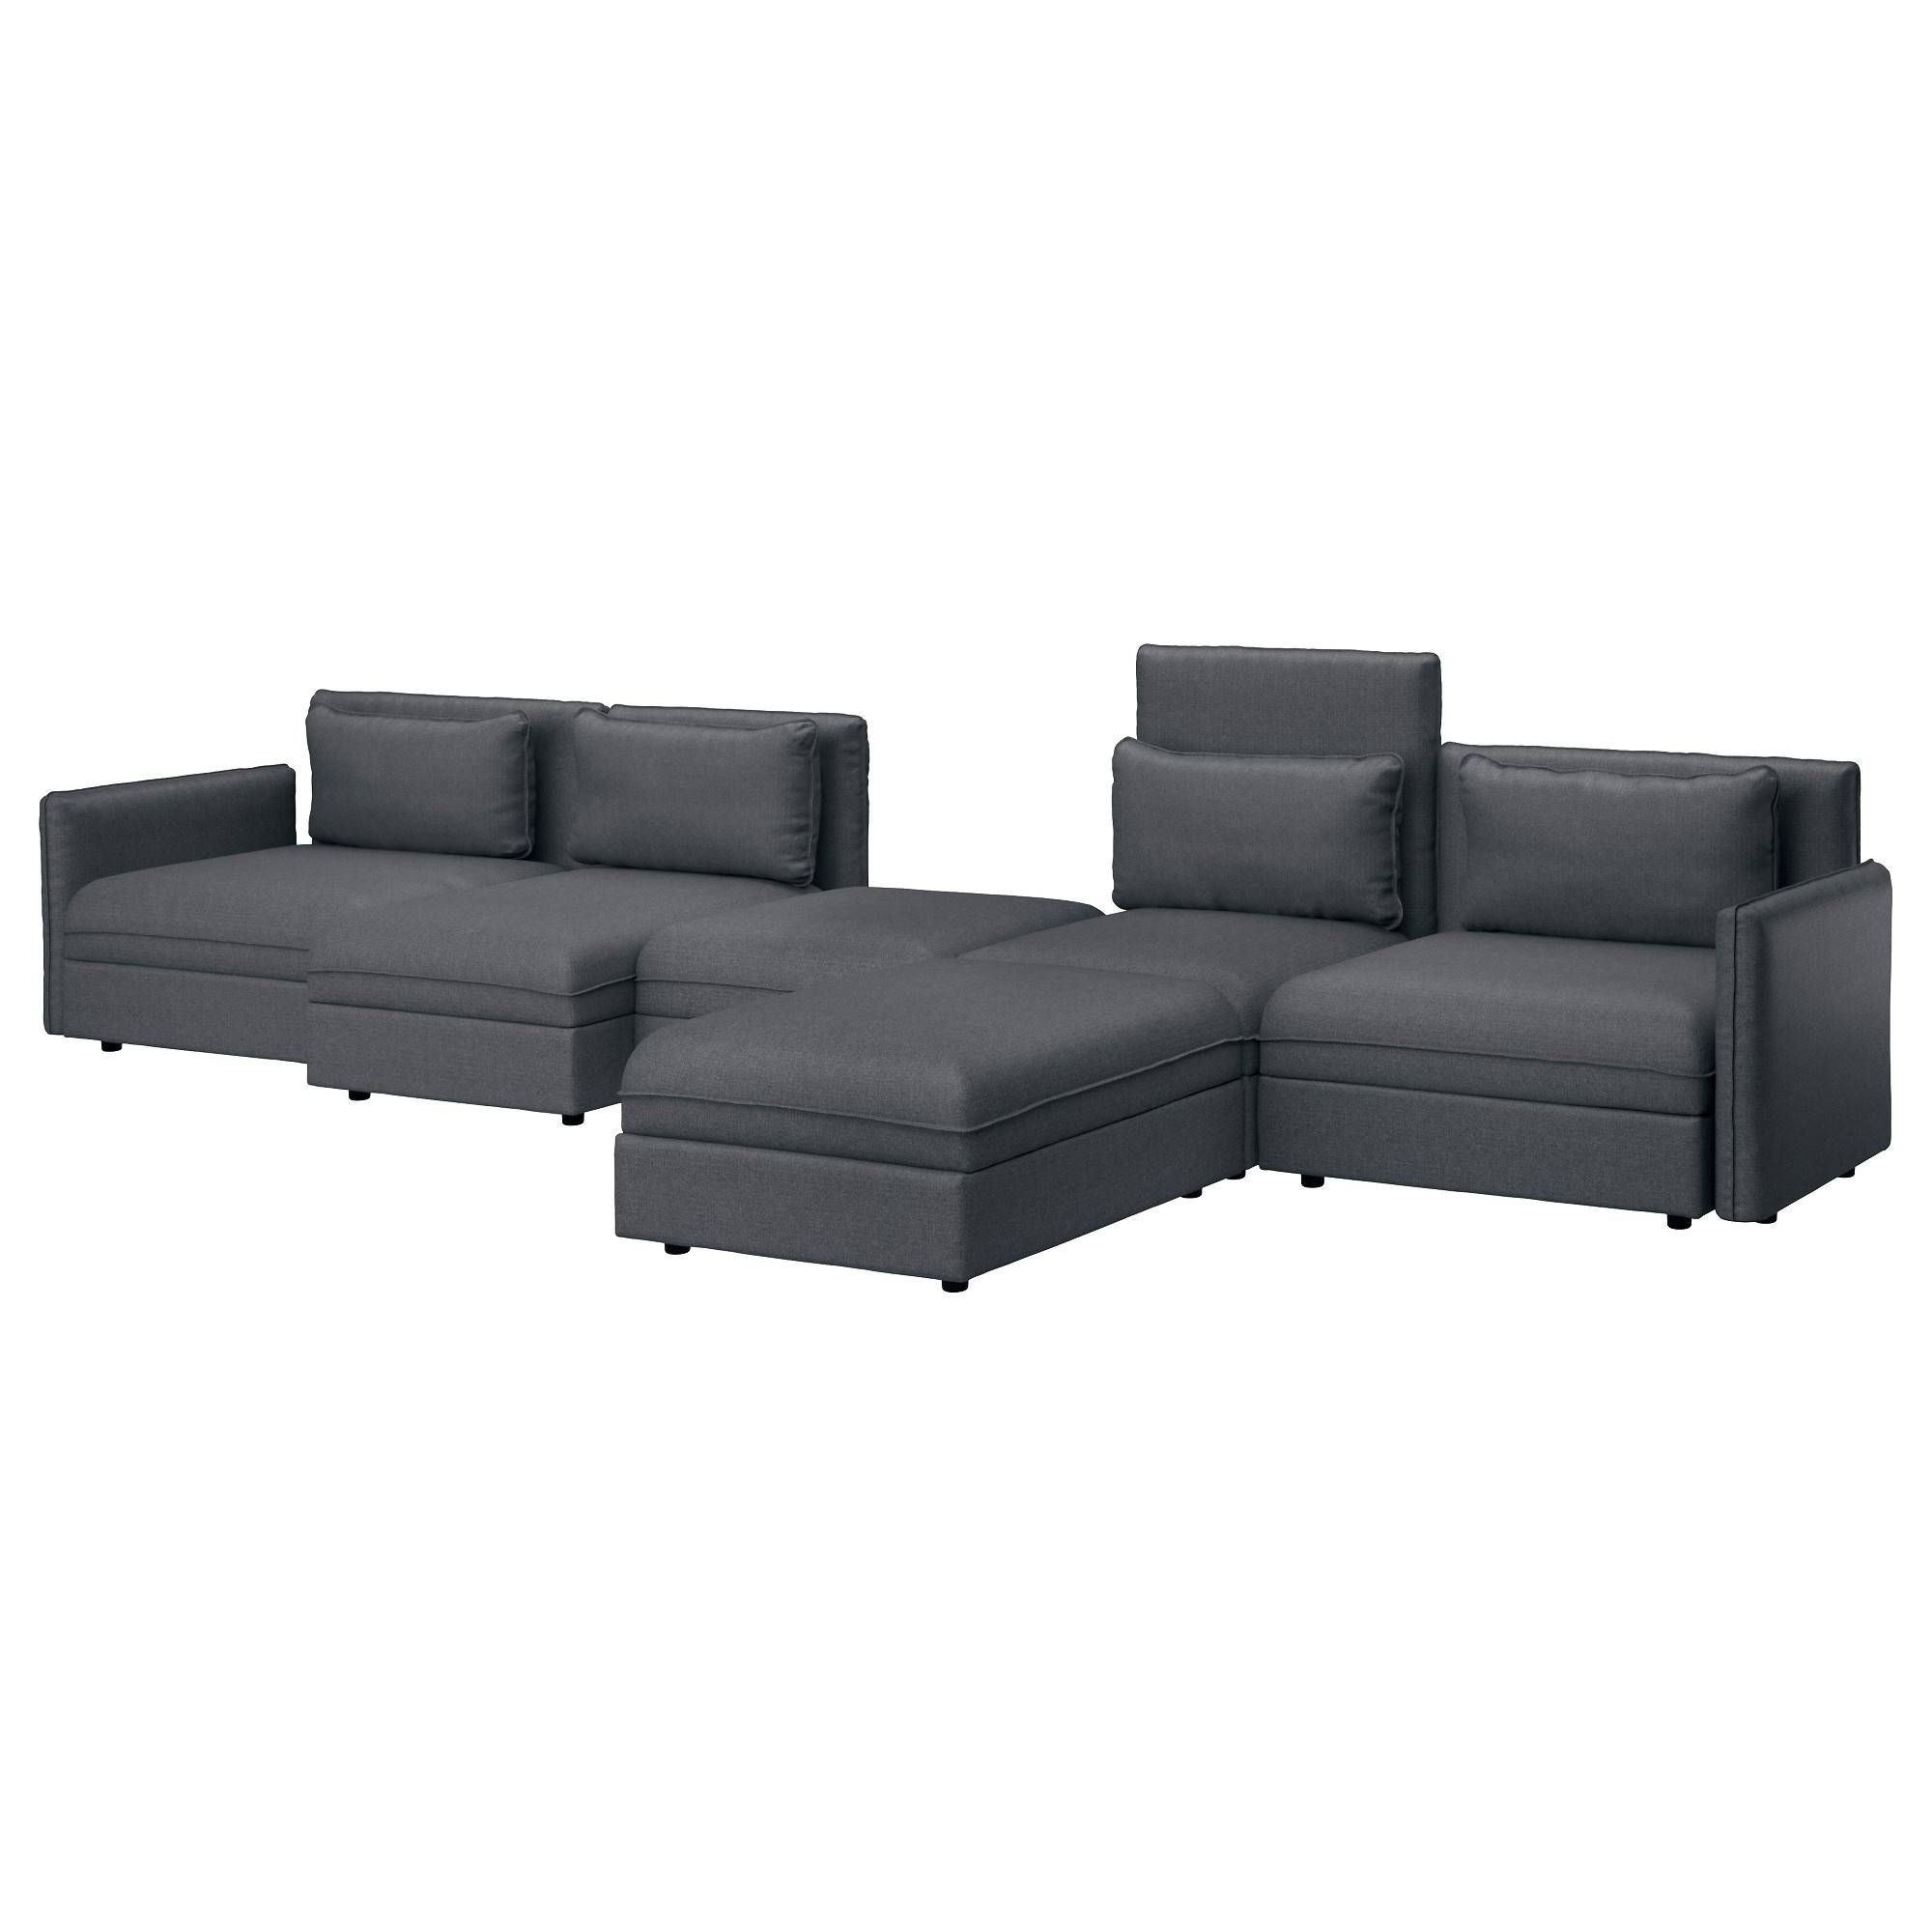 Sectional Sofas & Couches – Ikea Throughout Ikea Sectional Sofa Bed (View 17 of 25)